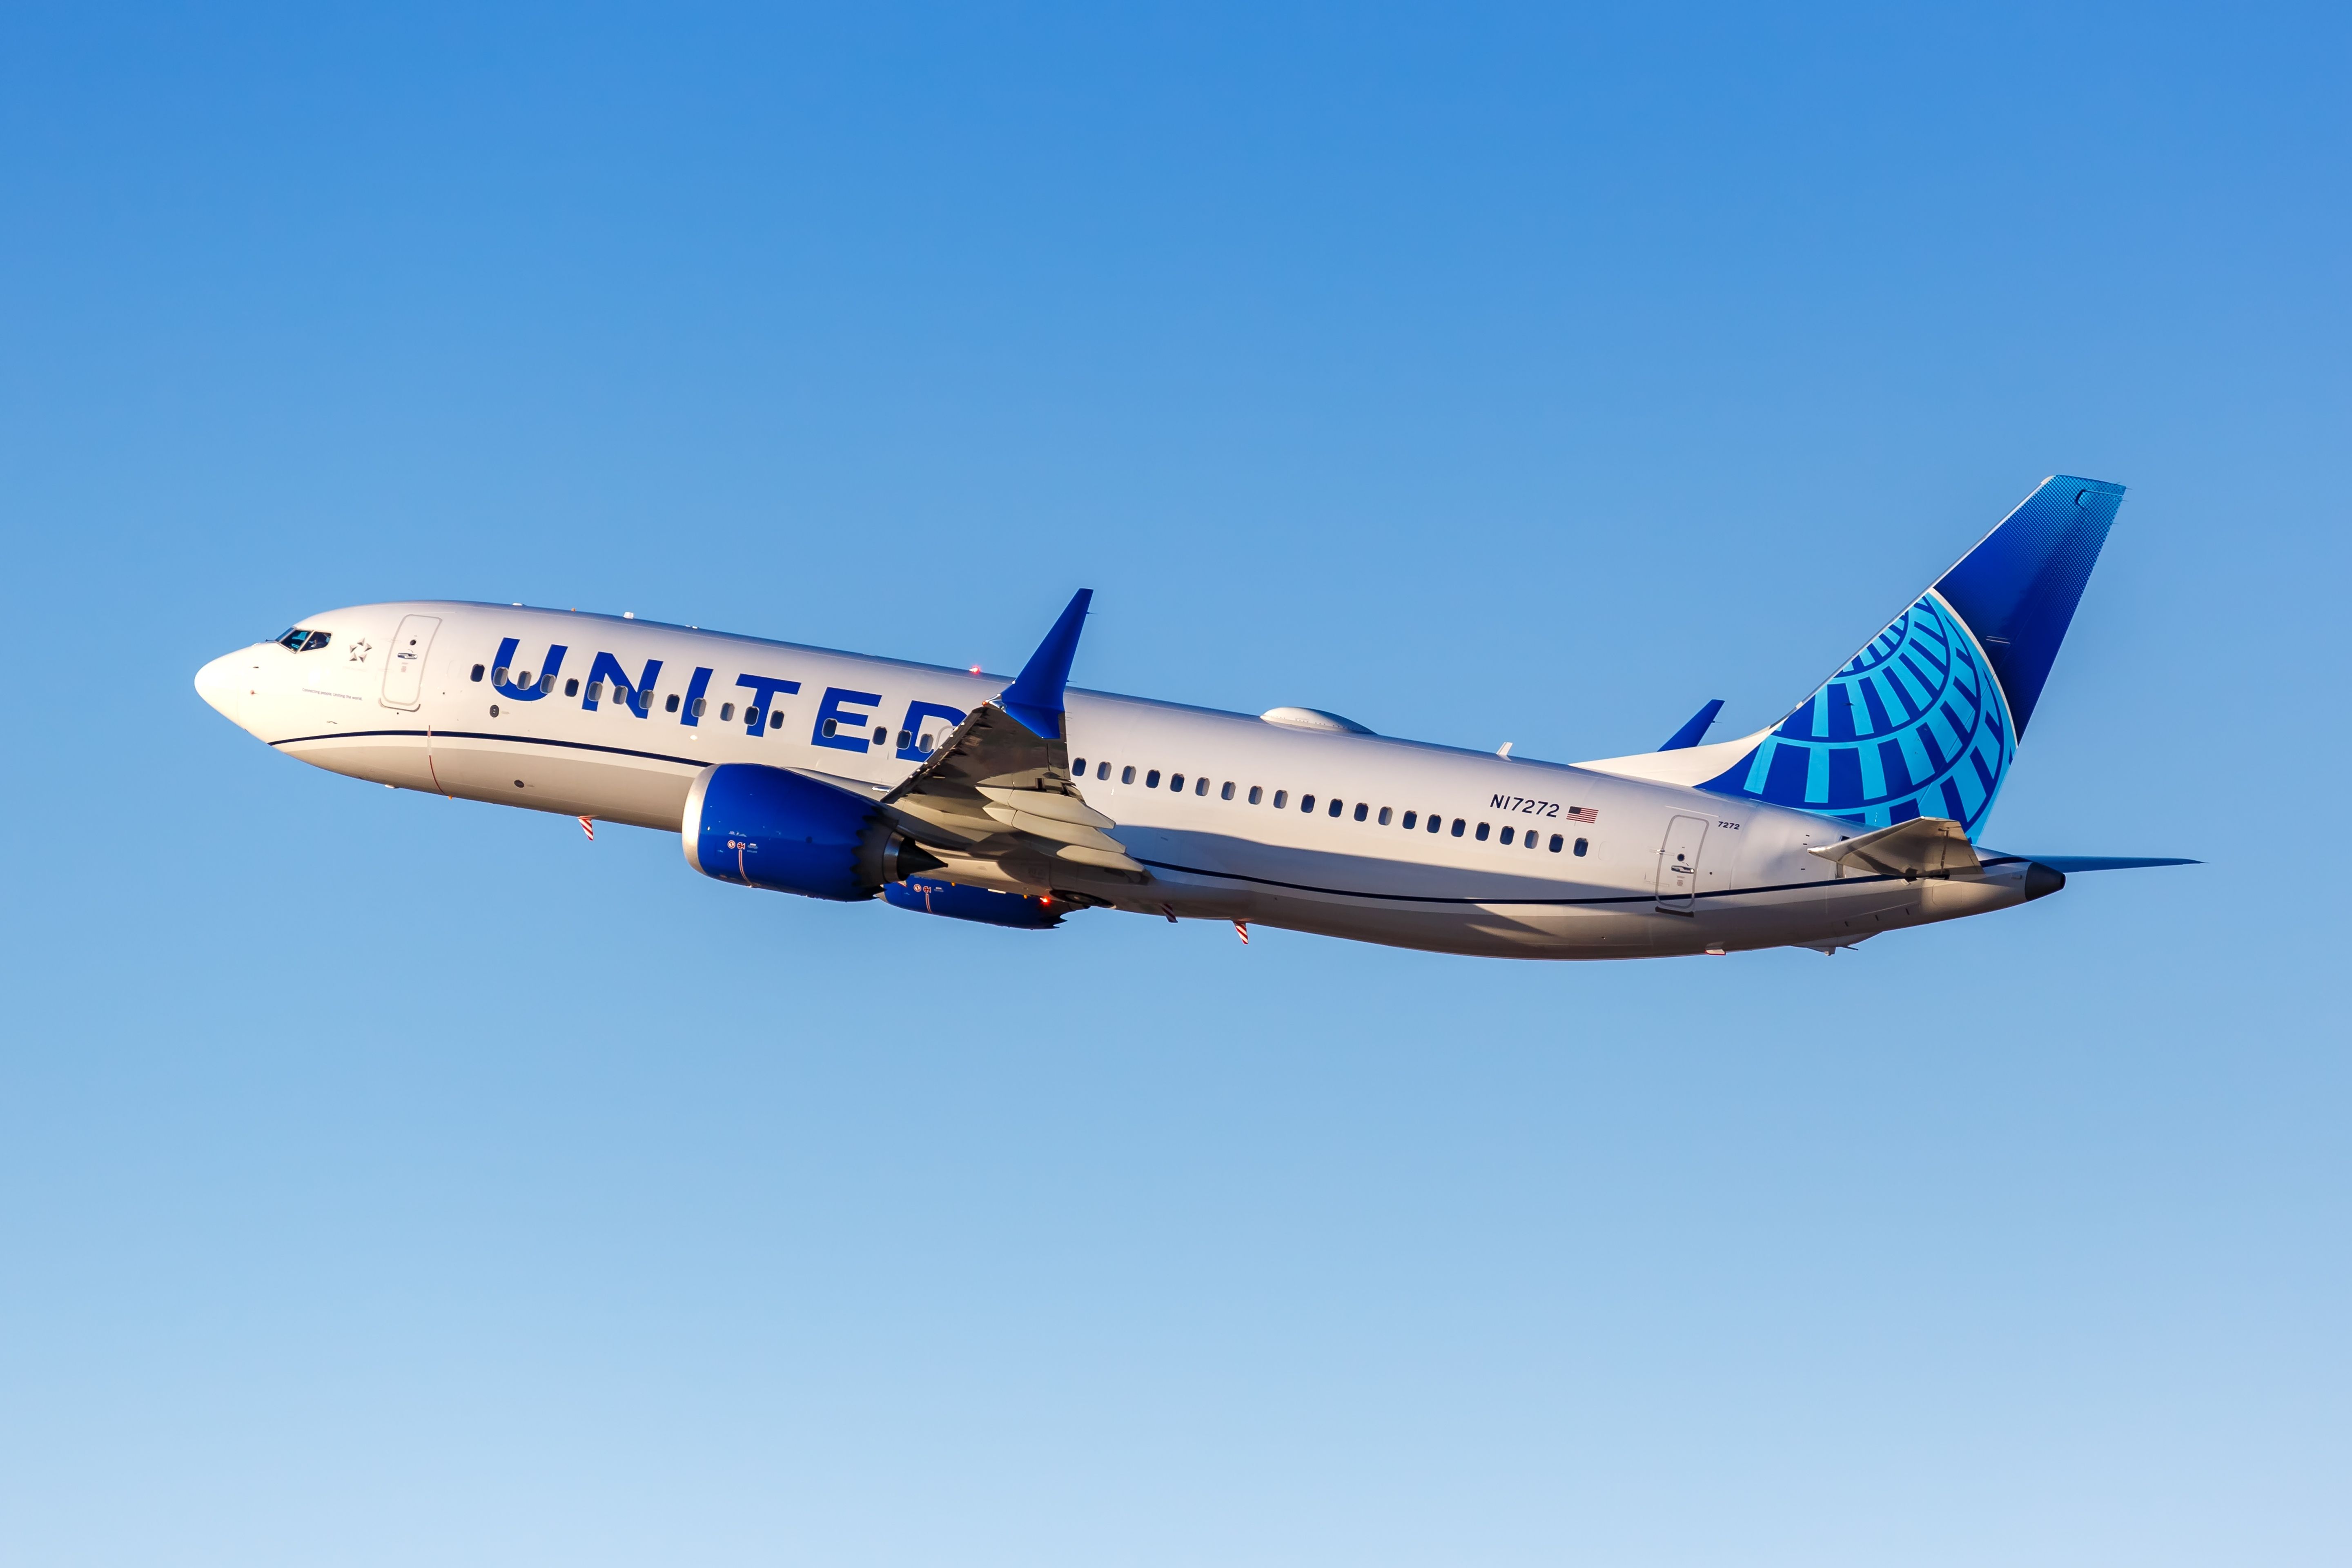 A United Airlines Boeing 737 MAX flying in the sky.